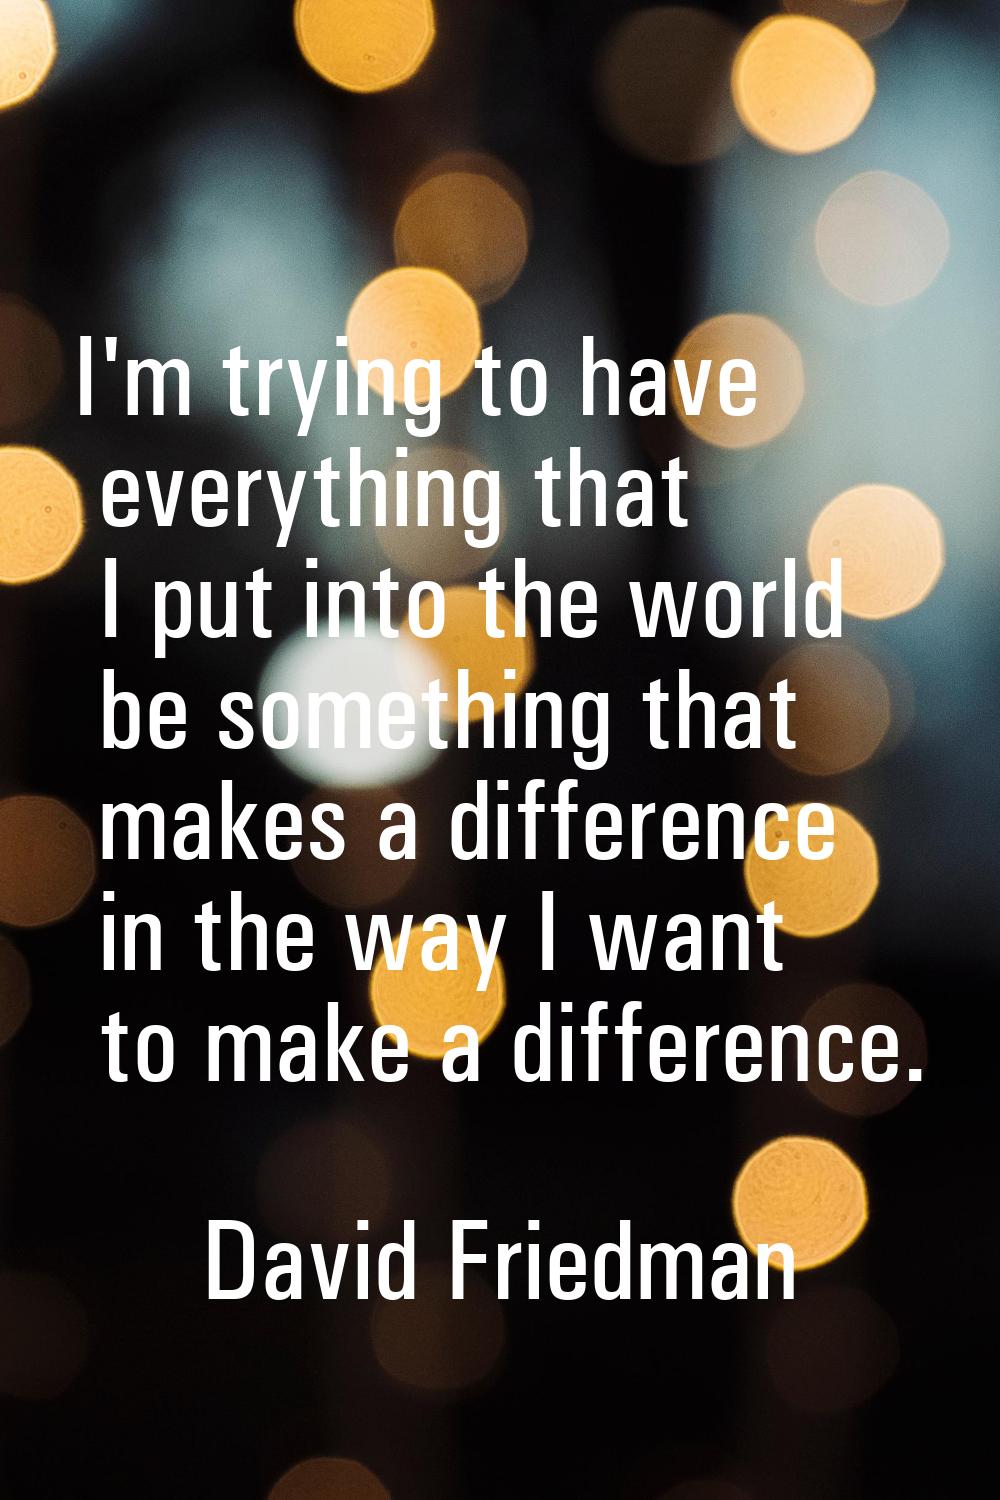 I'm trying to have everything that I put into the world be something that makes a difference in the